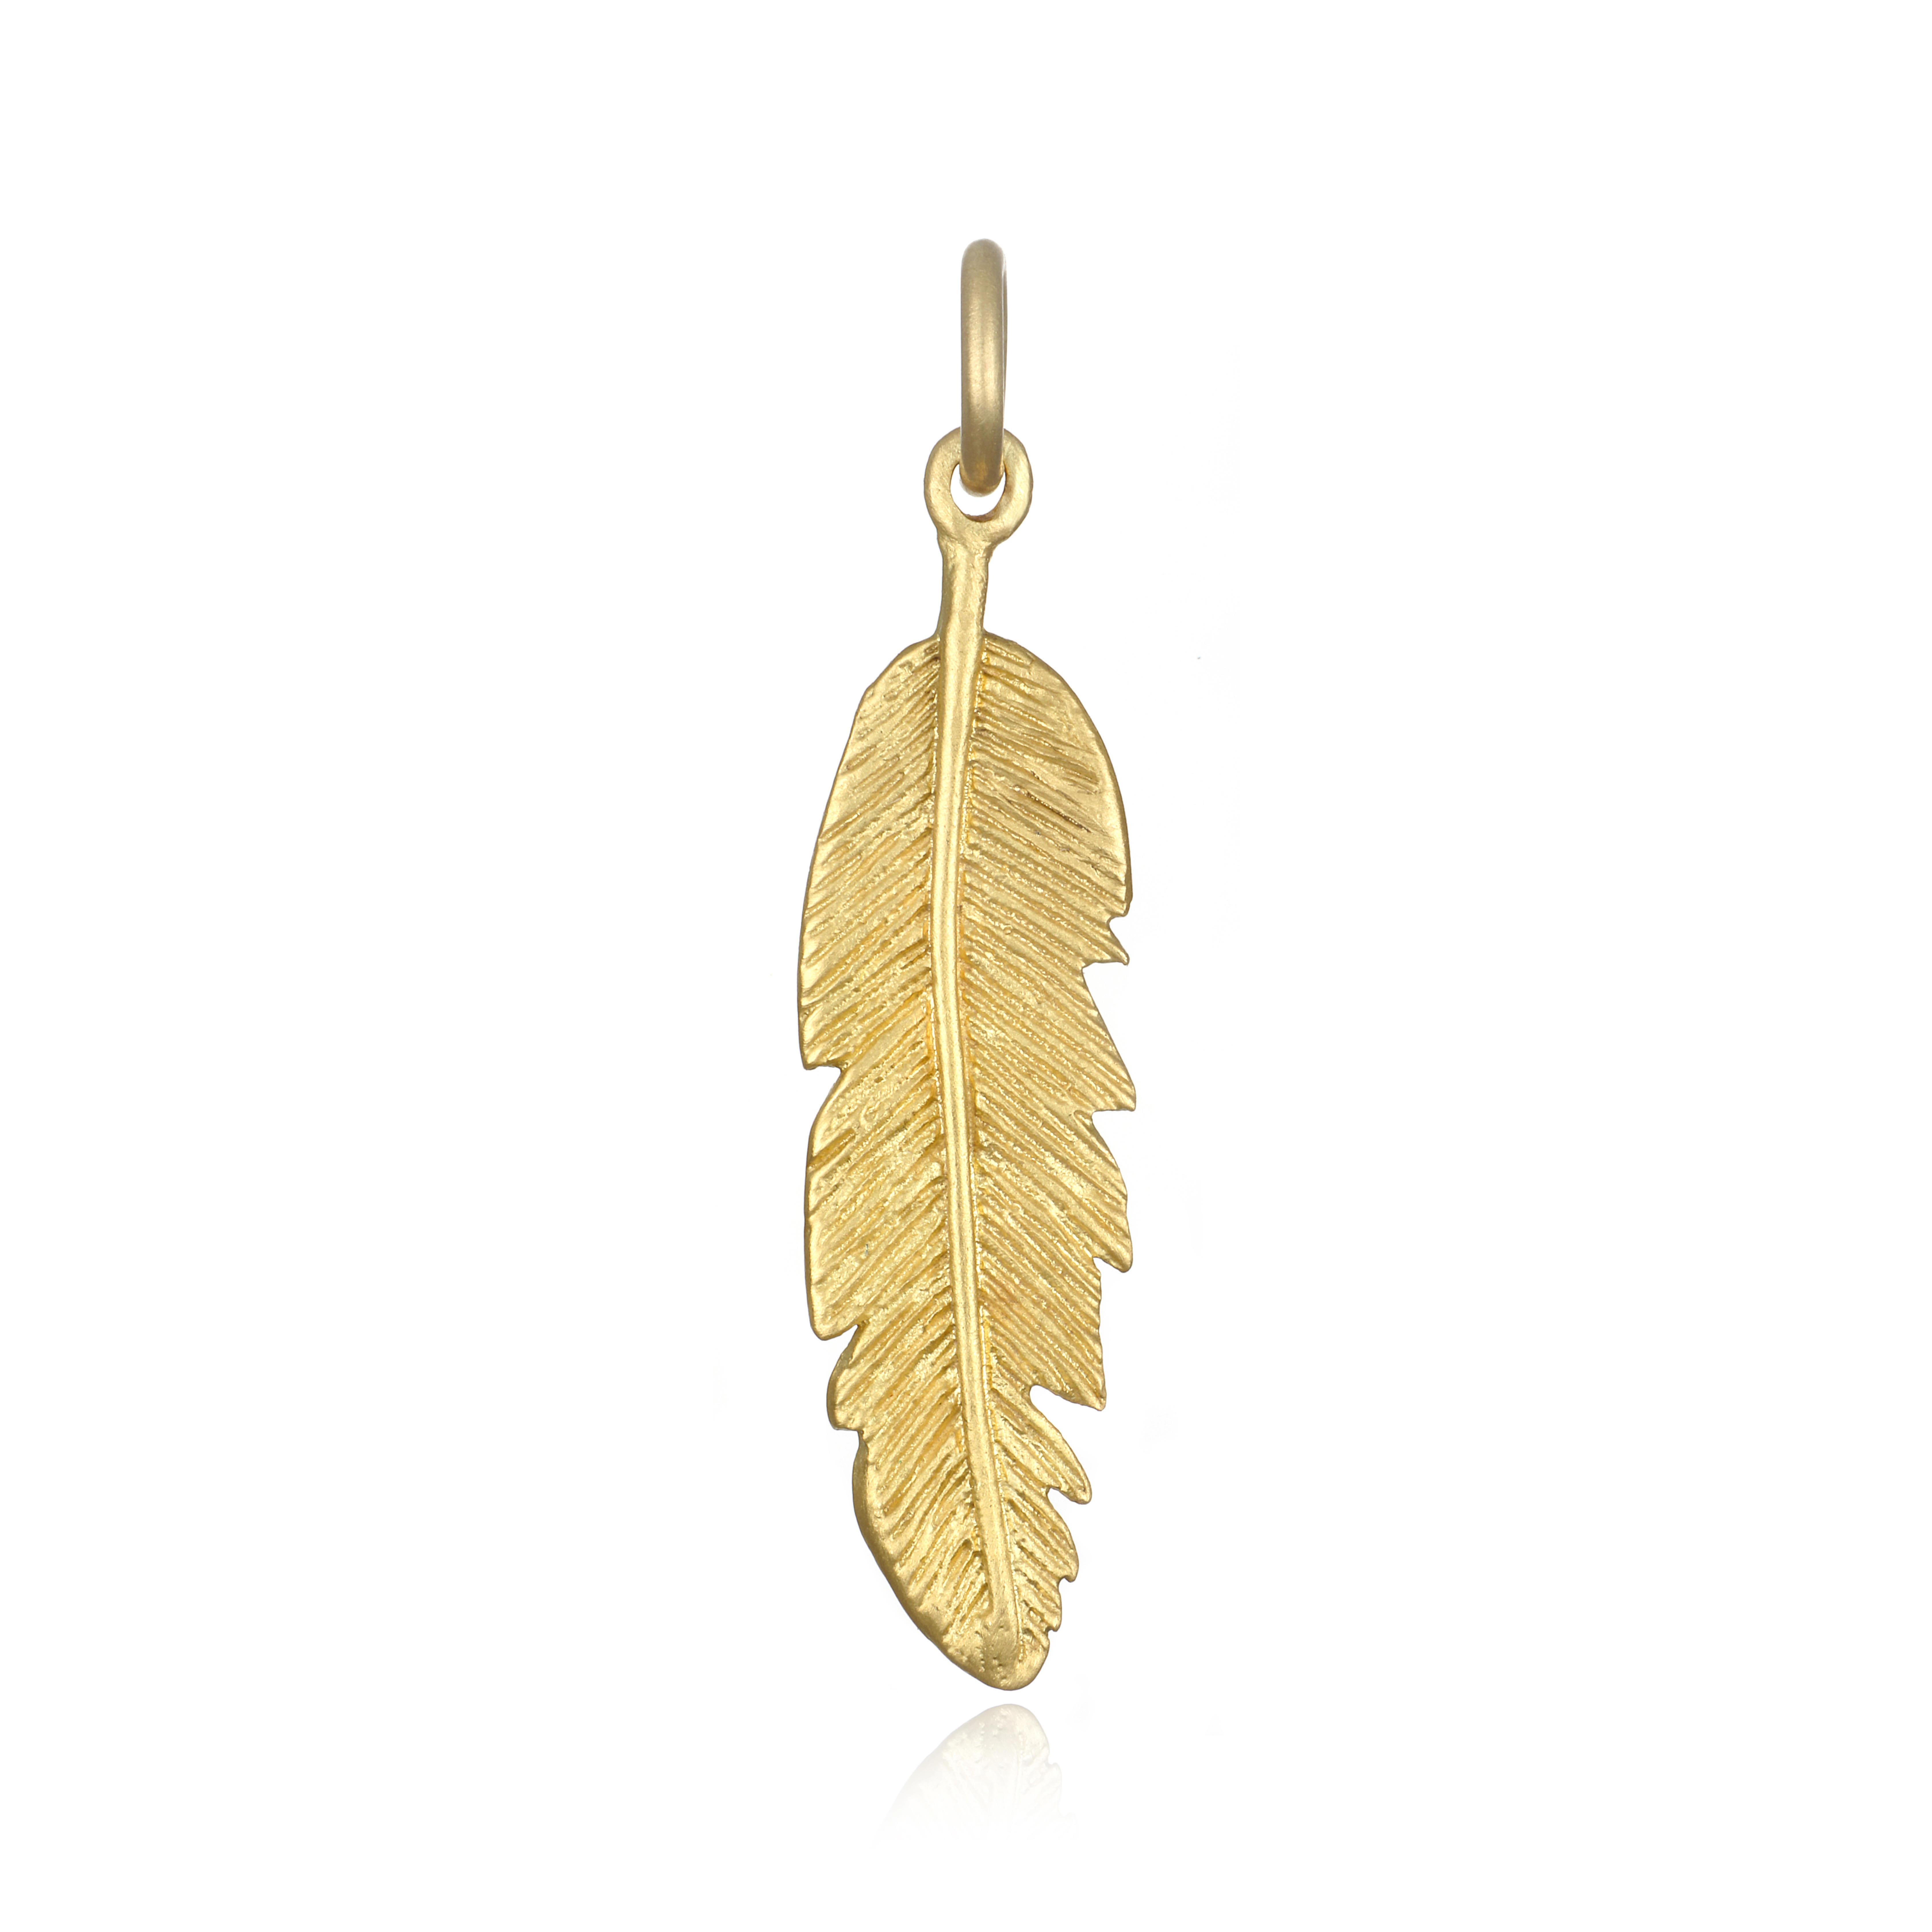 Symbolizing light, trust, and freedom, Faye Kim's feather charm necklace is handcrafted in 18k gold*.
Great worn alone or layered with other pieces. 

*Faye Kim's signature 18k green gold is comprised of 75% pure gold and 25% silver.
Customizable in